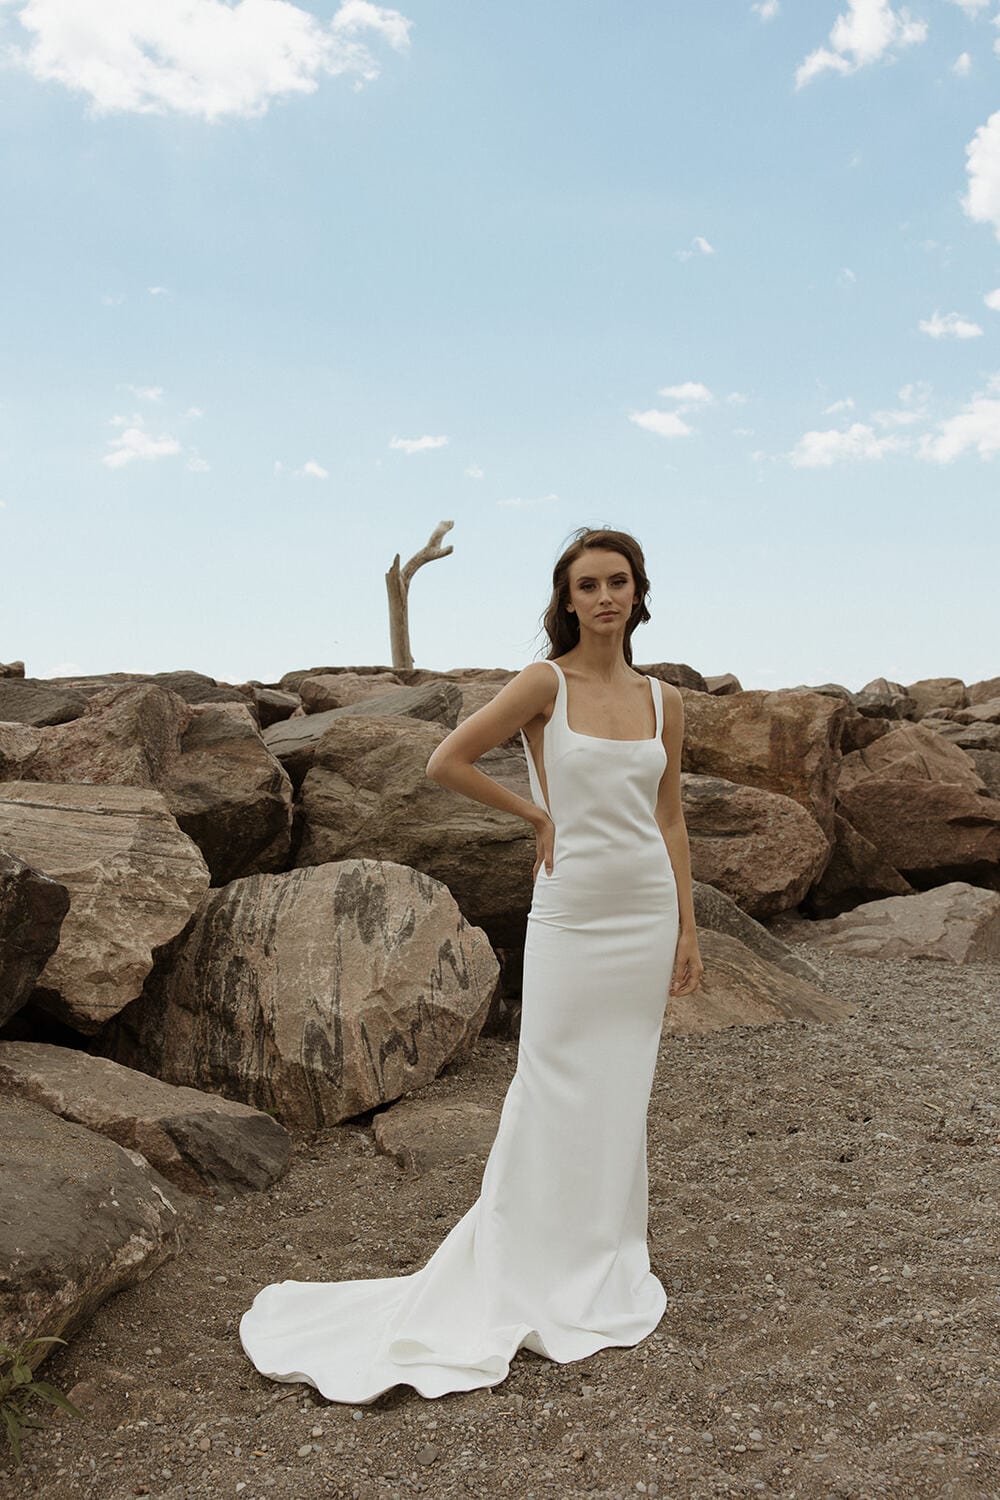 Deco Wedding Dress You Will Fall in Love with - Chic Bridals 